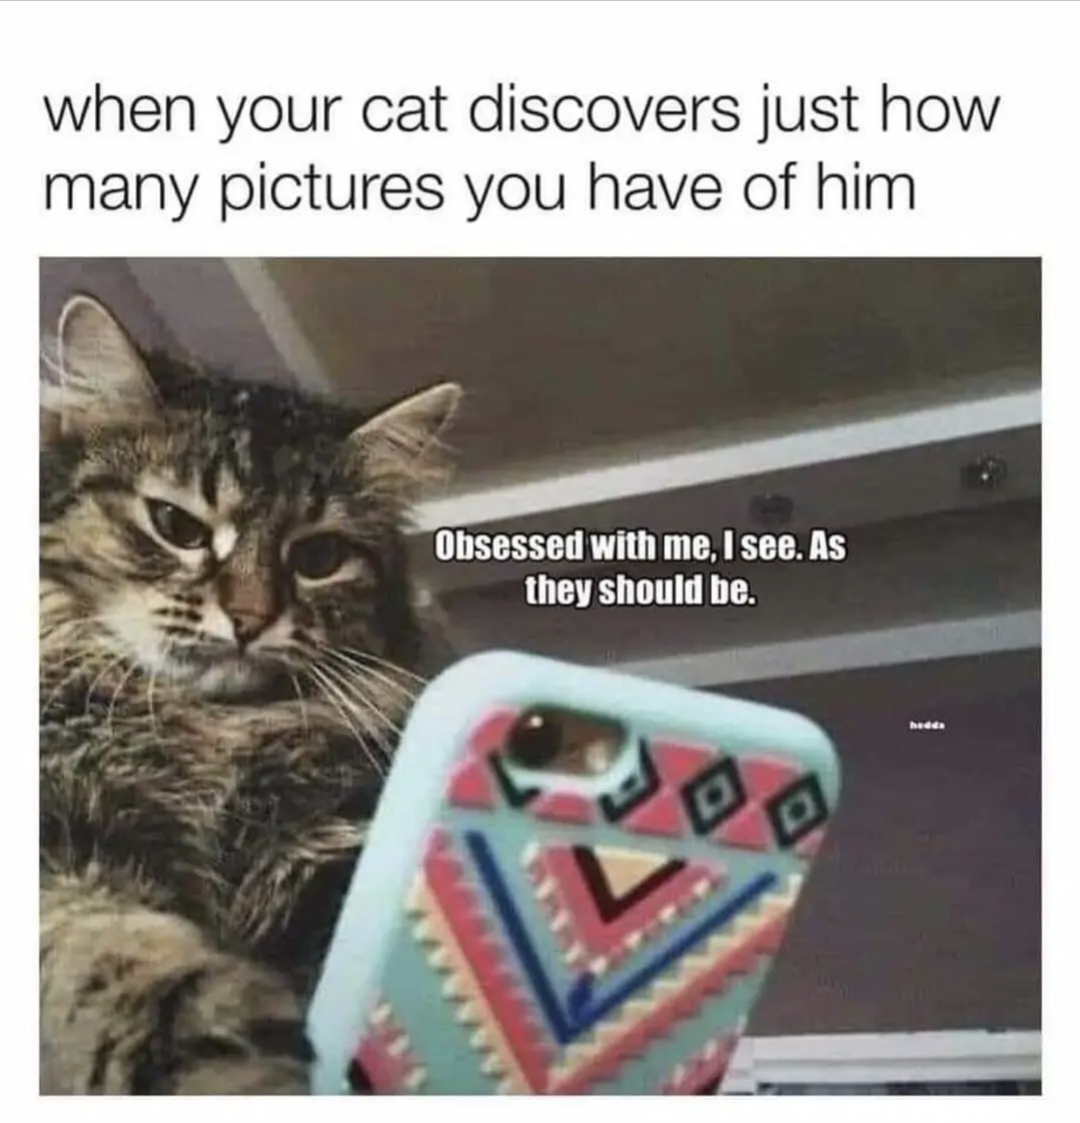 A meme showing a photo of a cat with its paw on a mobile phone, the caption says 'when your cat discovers just how many pictures you have of him’ and the text next to the cat says ‘Obsessed with me, I see. As they should be.’